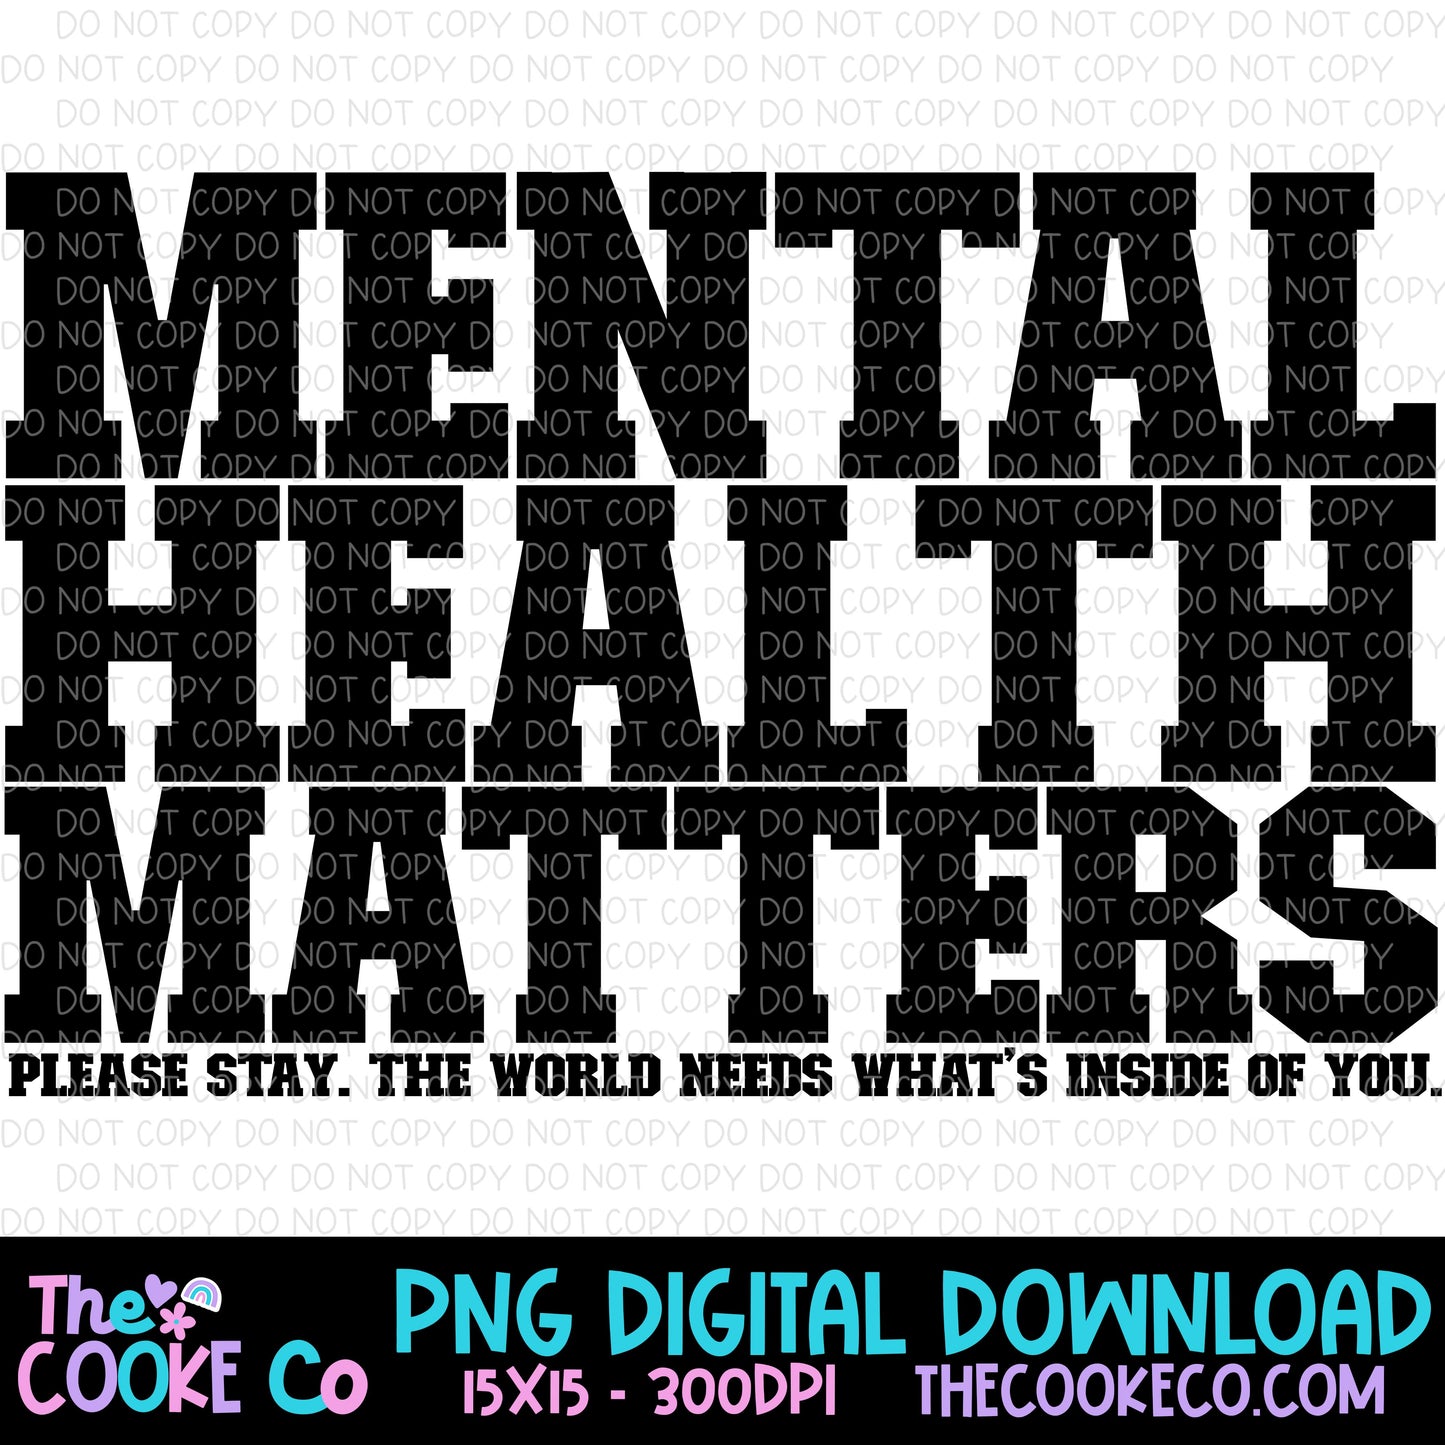 MENTAL HEALTH MATTERS. PLEASE STAY. | Digital Download | PNG